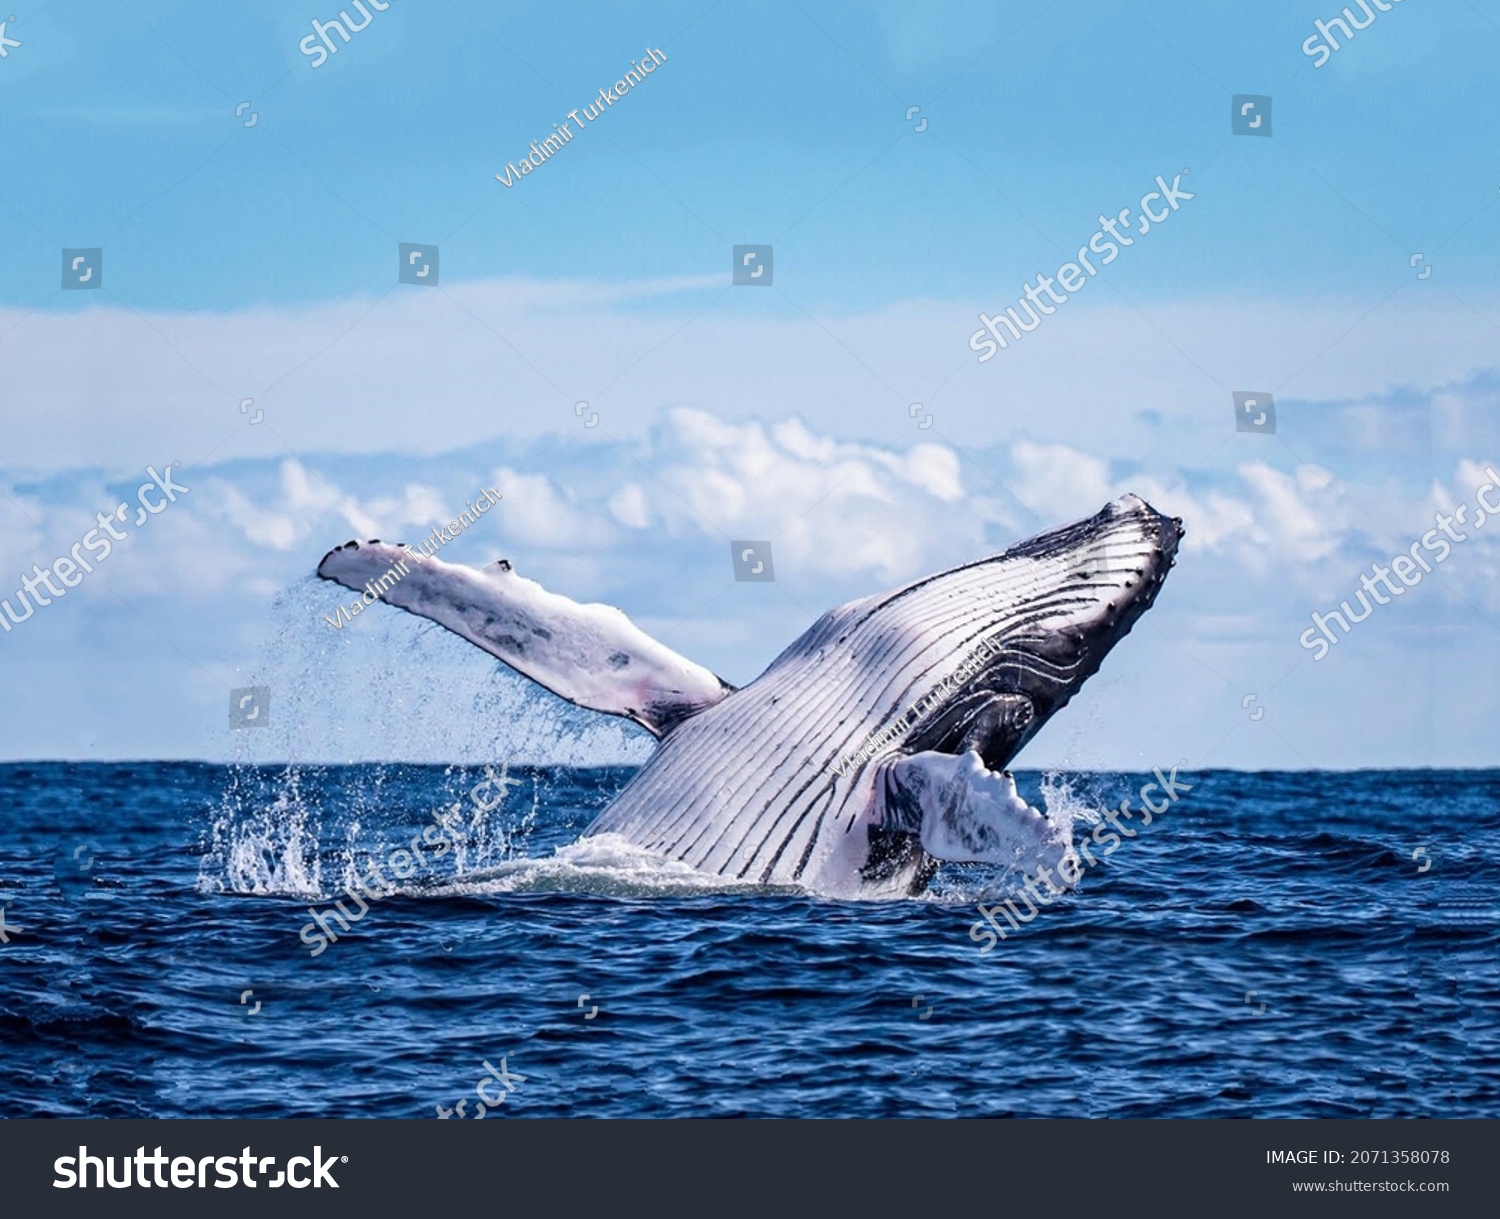 A magnificent humpback whale emerges over the blue water surface in close-up #2071358078